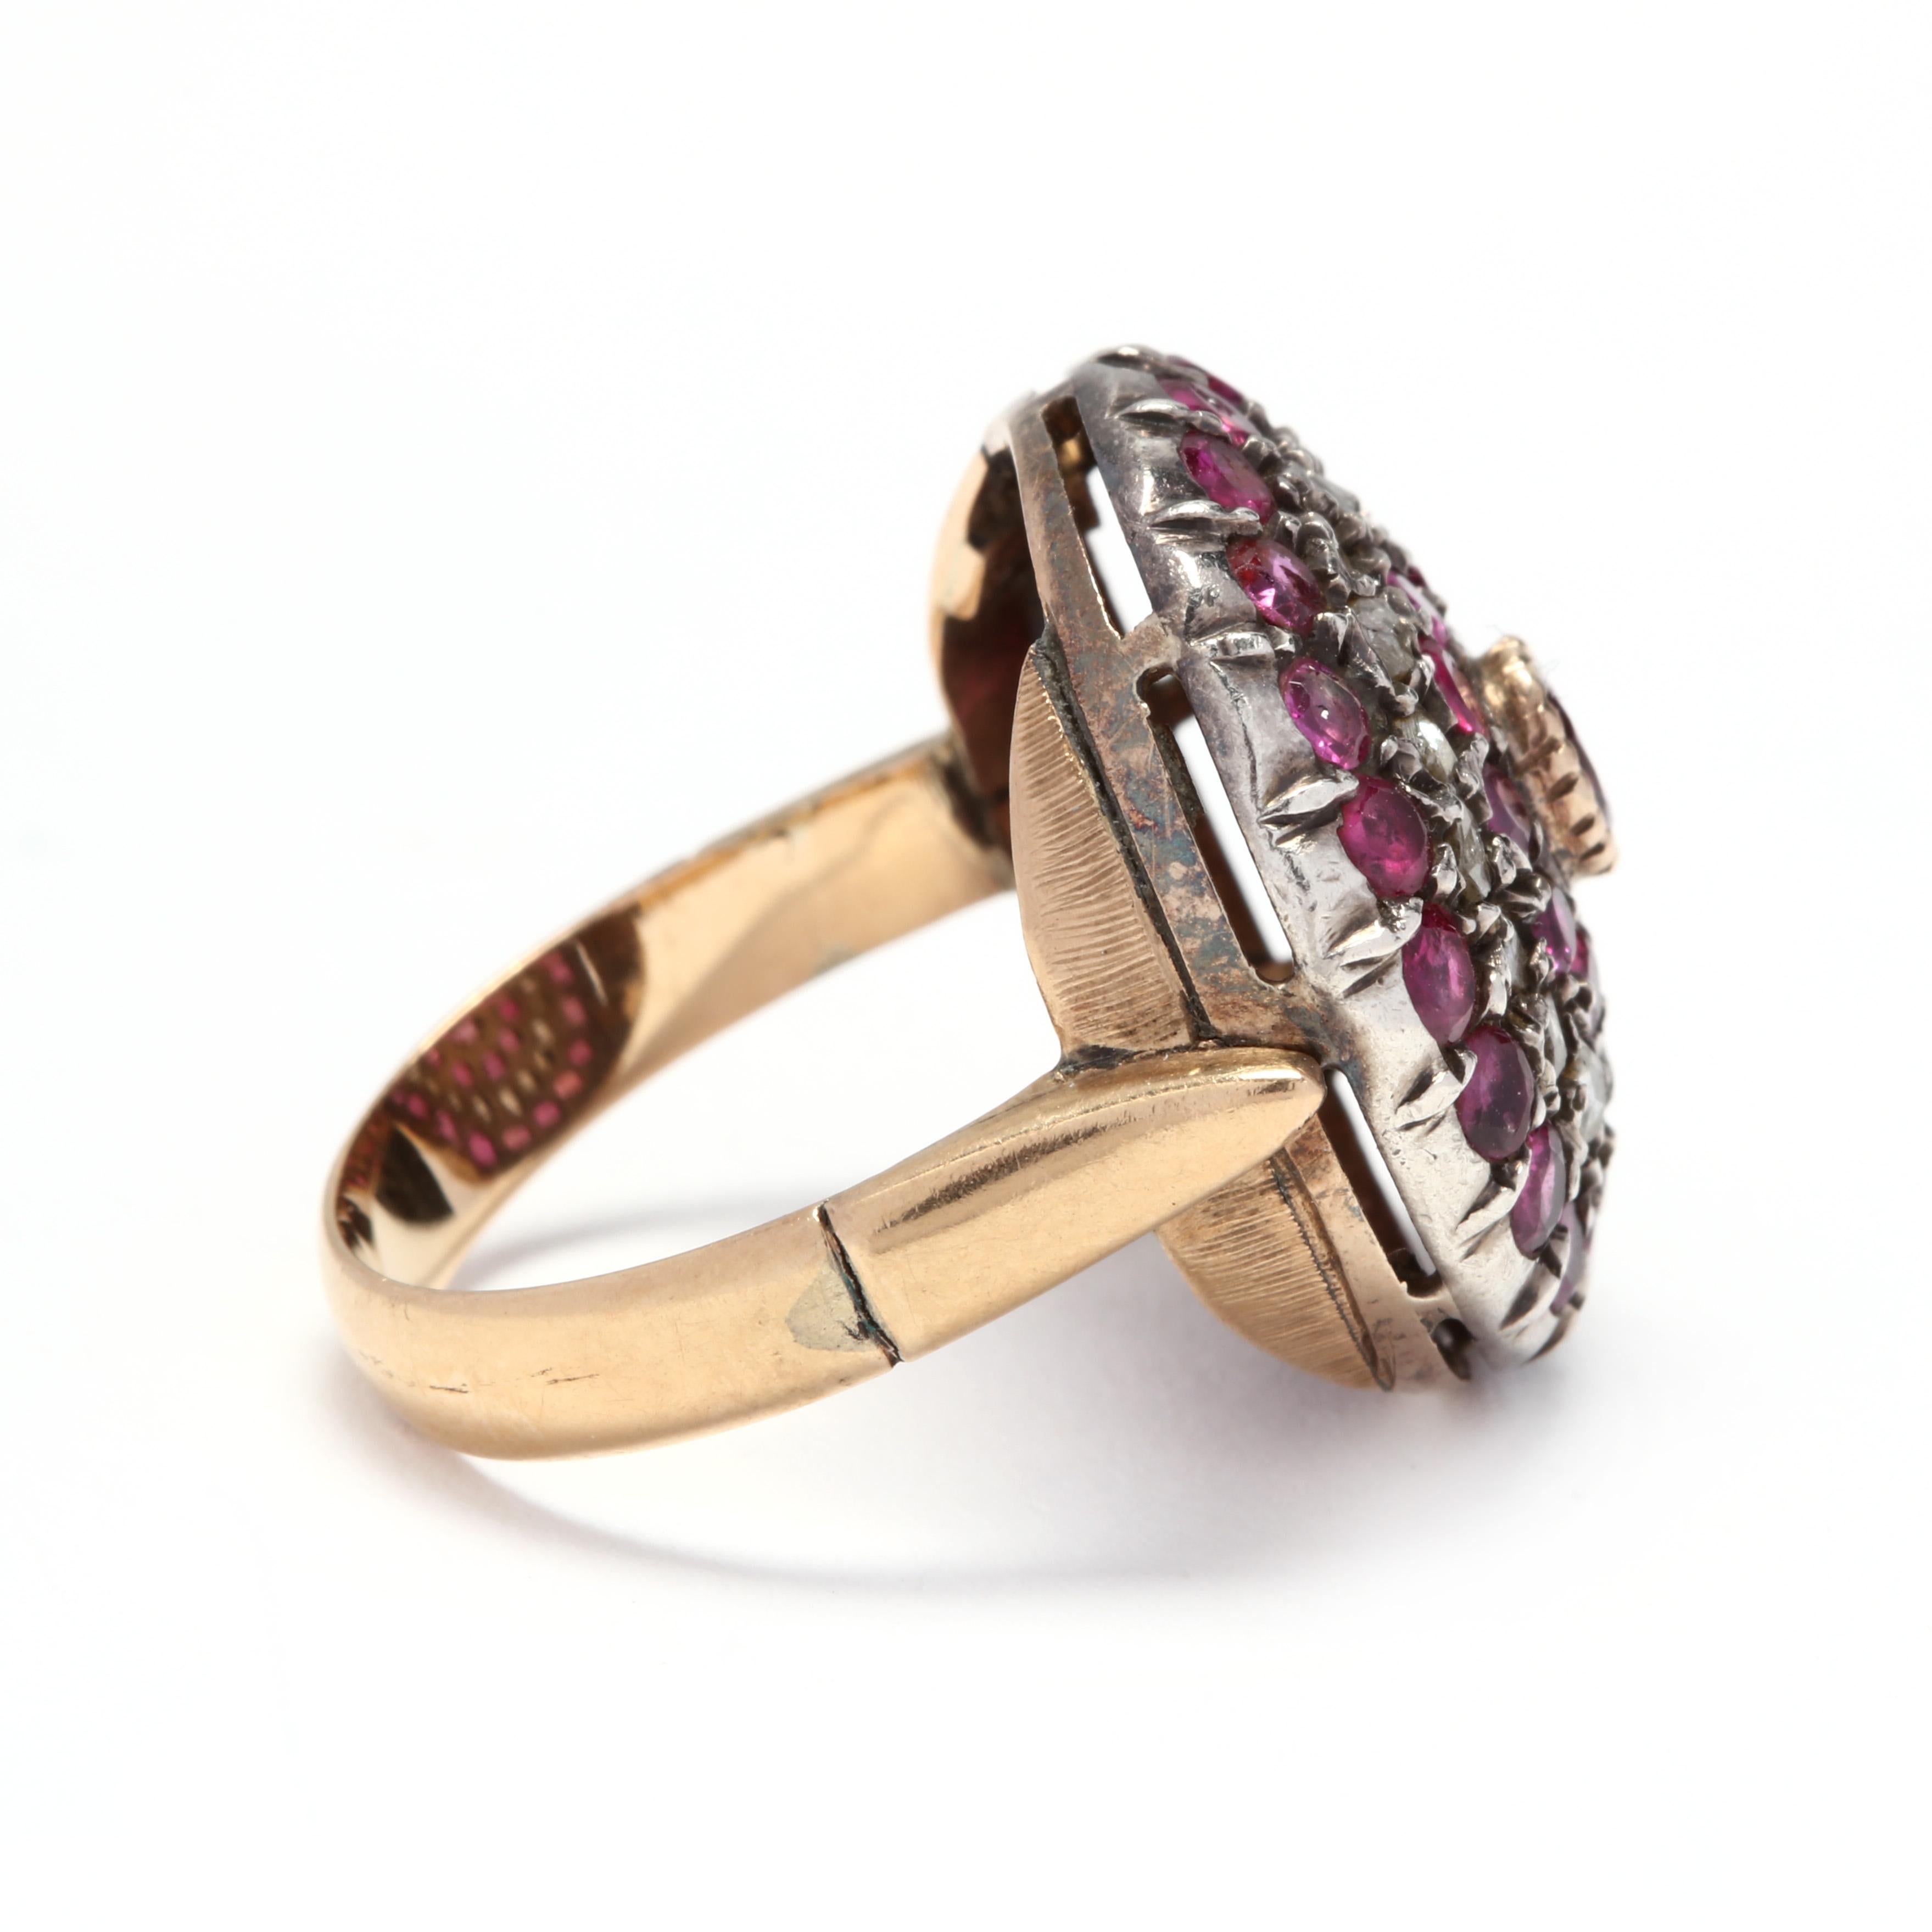 Victorian Antique 18 Karat Yellow Gold, Silver, Diamond and Ruby Target Ring